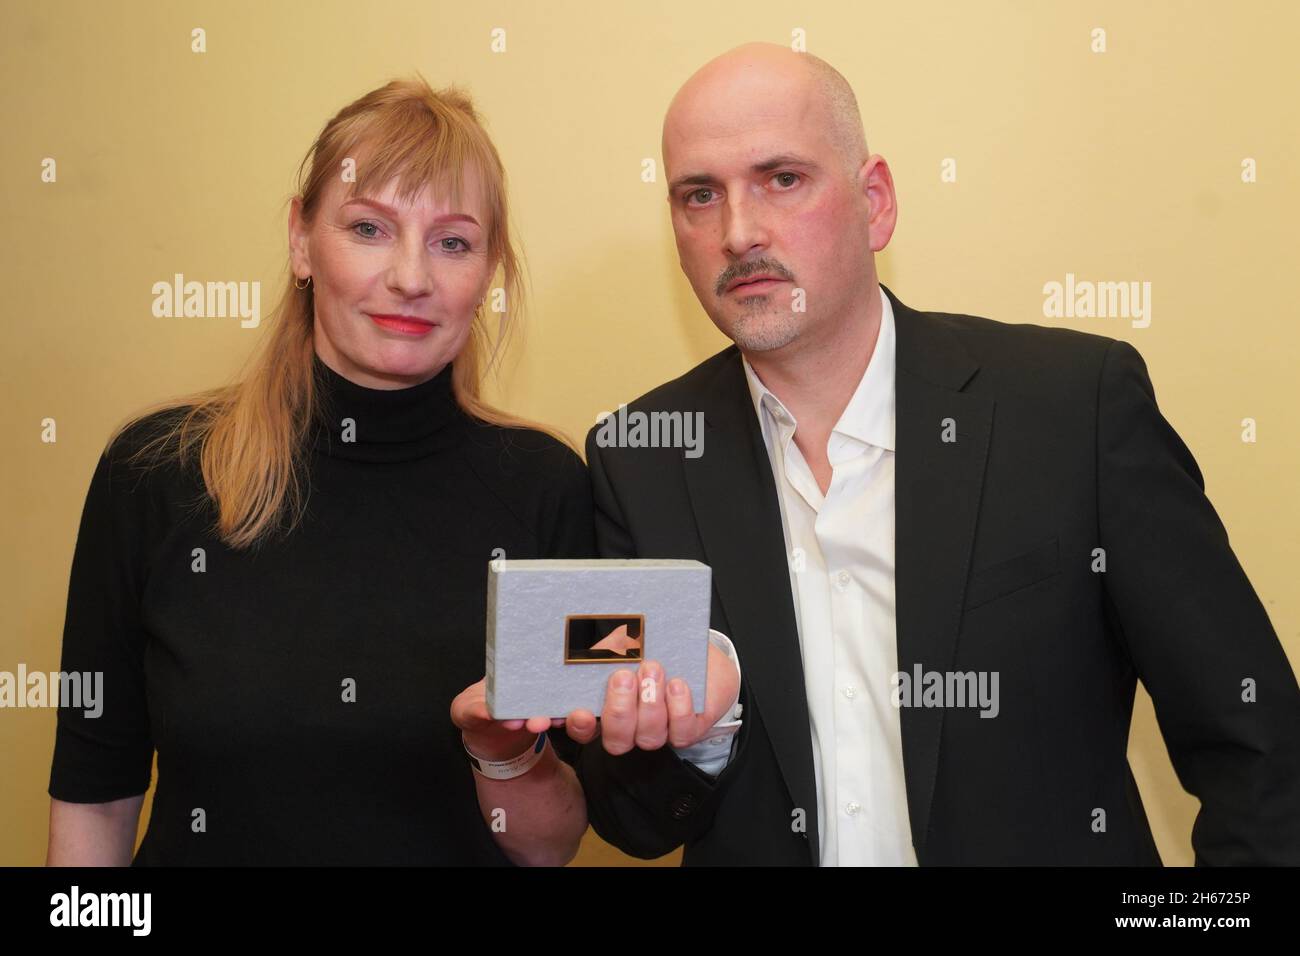 Berlin, Germany. 13th Nov, 2021. Julia Karg and Kai Minierski receive an award in the category 'Film Editing' at the DAfF (German Academy for Television) awards ceremony at the Babylon cinema. Credit: Jörg Carstensen/dpa/Alamy Live News Stock Photo